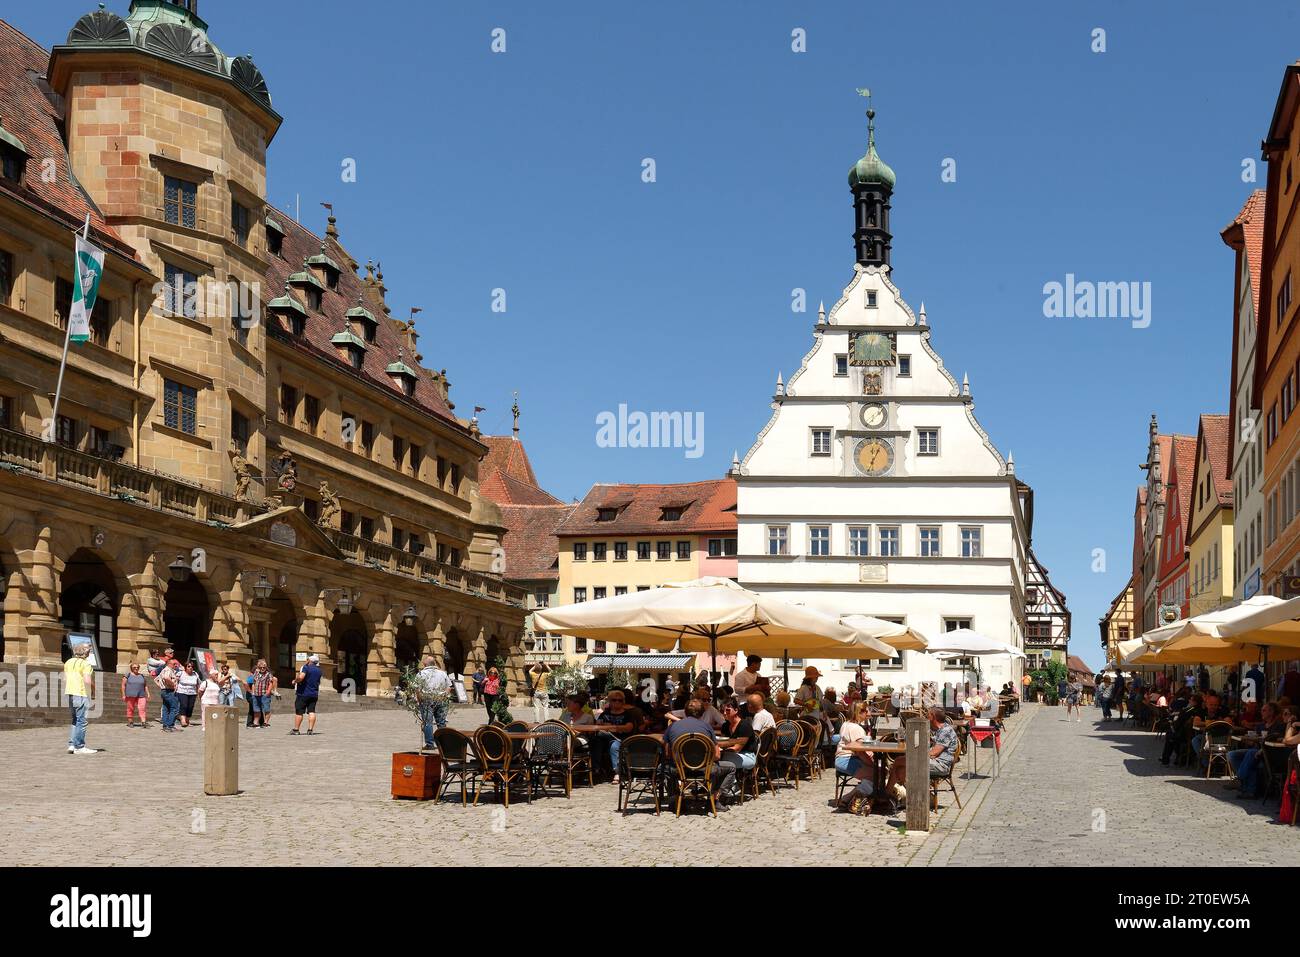 Old town hall and council drinking bar at the historic market place, Rothenburg ob der Tauber, Middle Franconia, Romantic Road, Tauber Valley, Bavaria, Germany Stock Photo